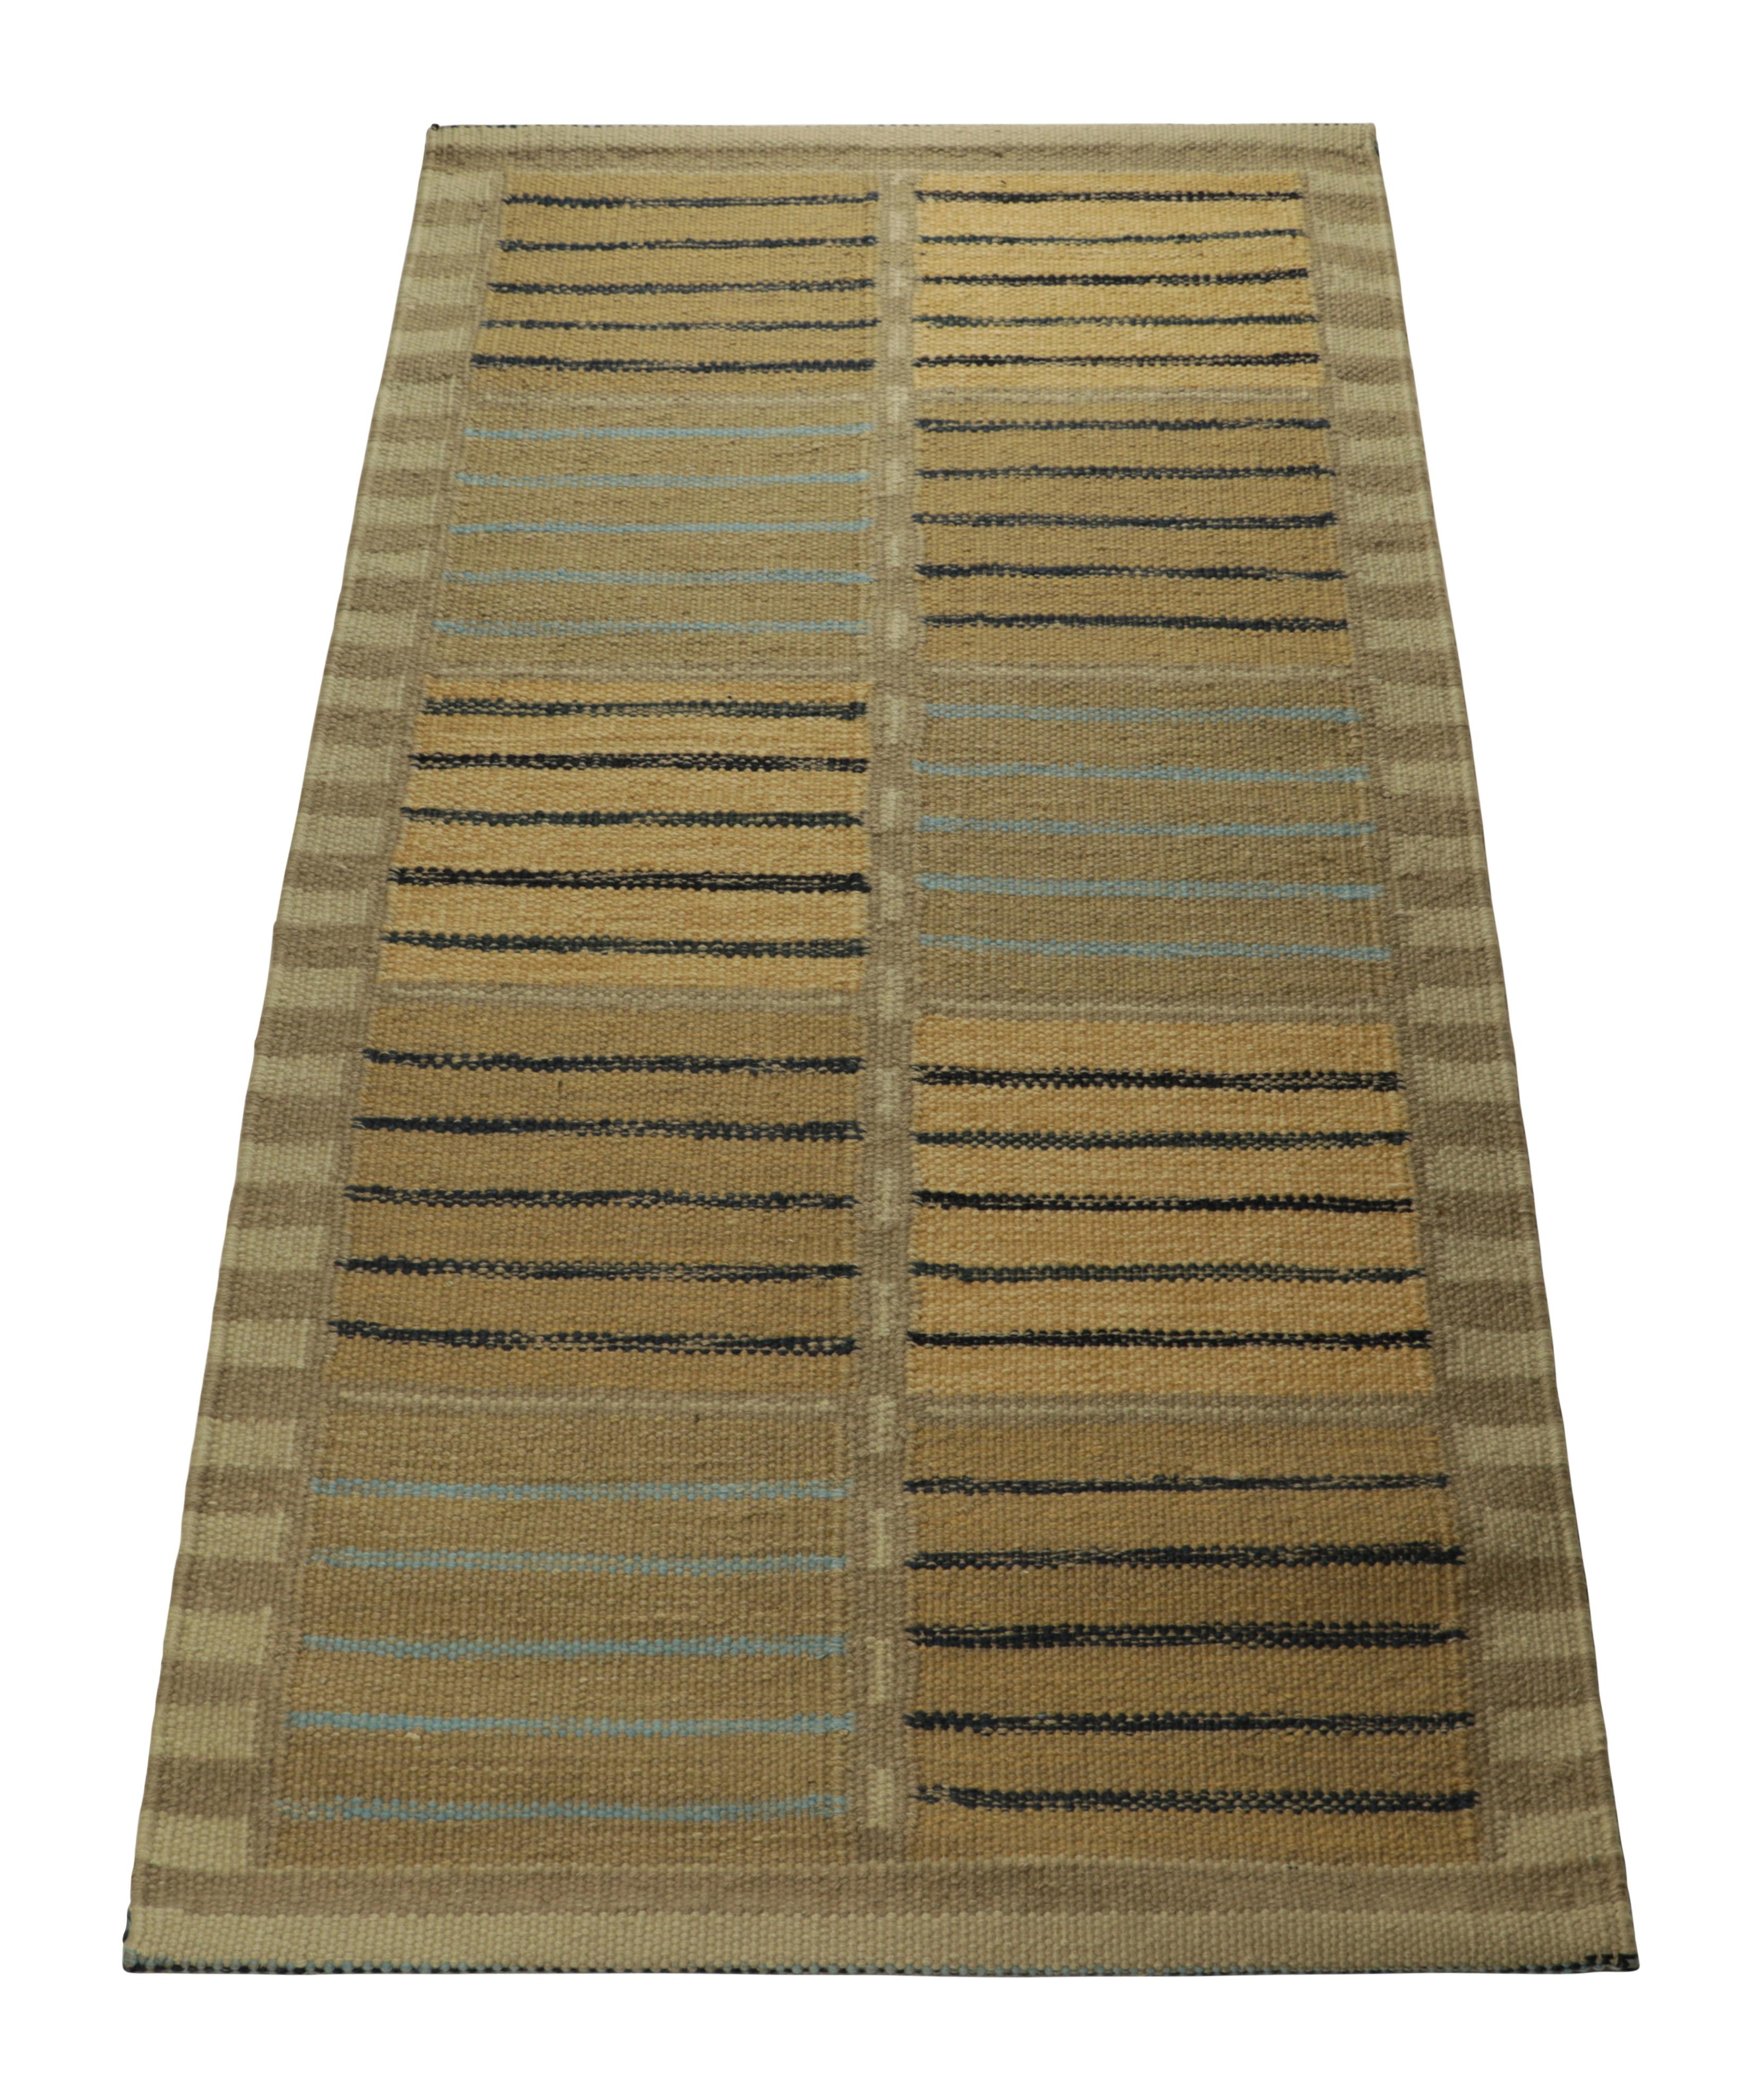 Indian Rug & Kilim’s Scandinavian Style Rug in Beige-Brown, with Geometric Stripes For Sale